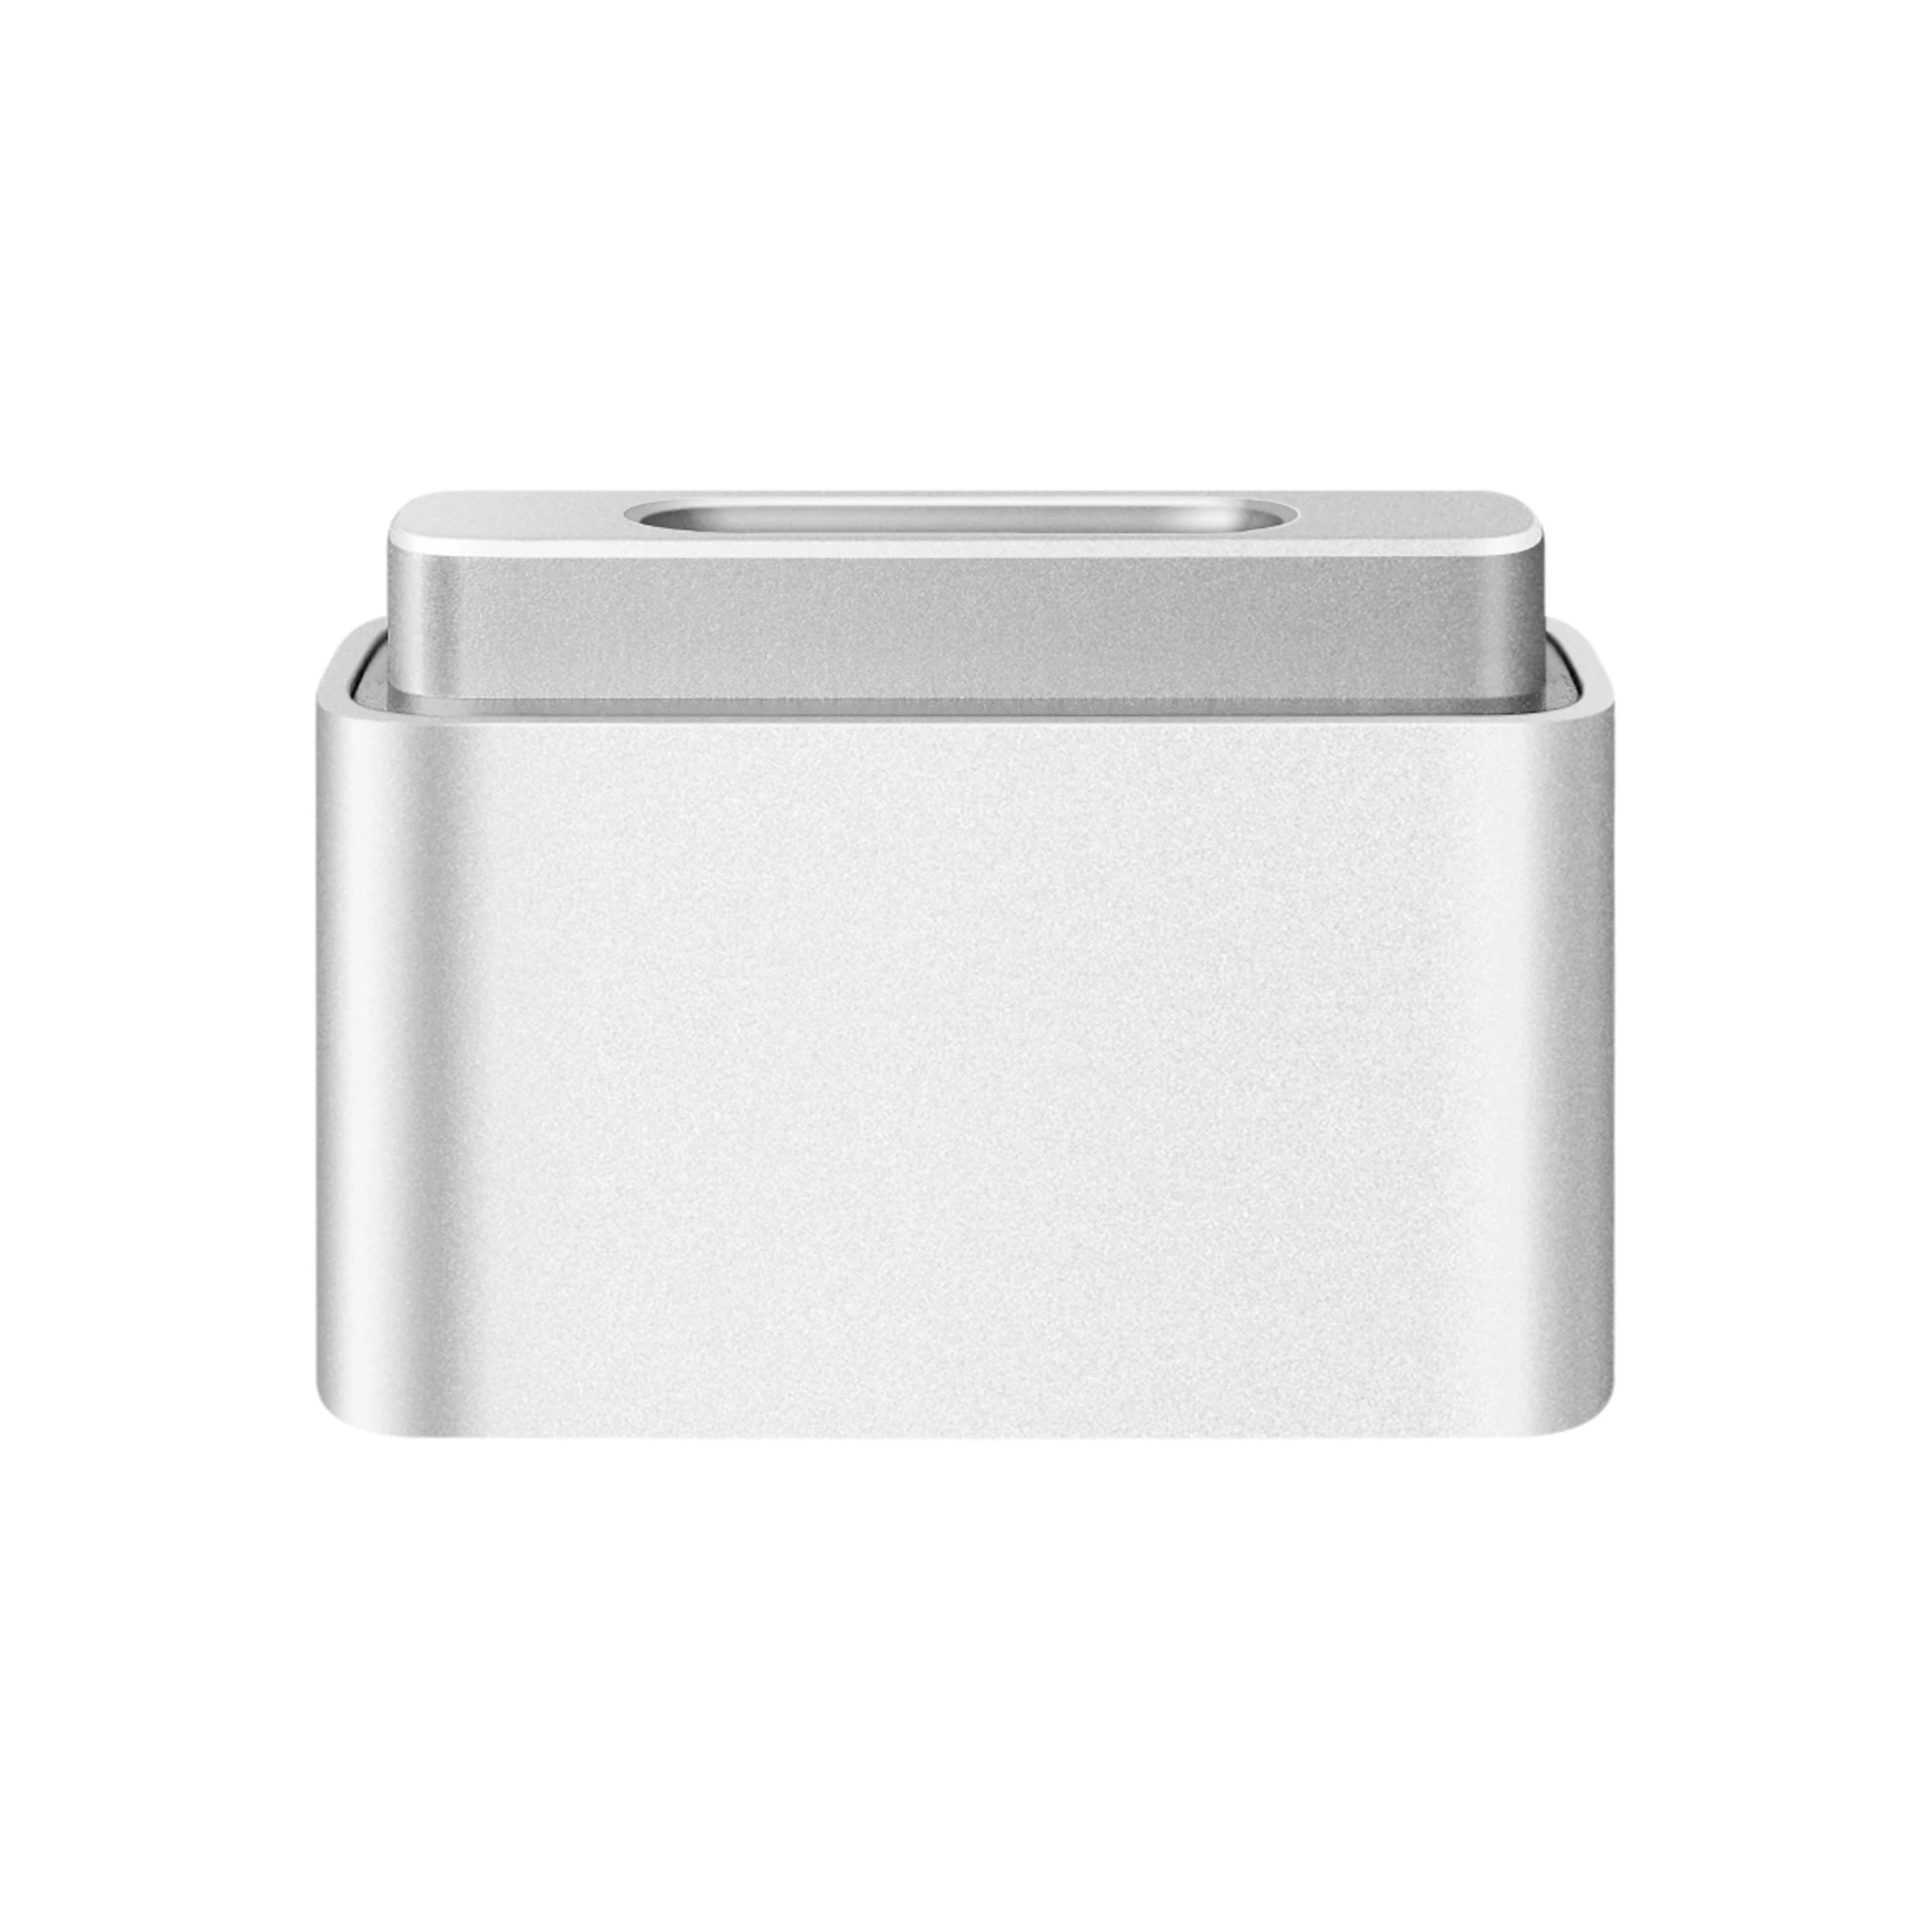 Apple MagSafe to MagSafe 2 Converter (MD504)